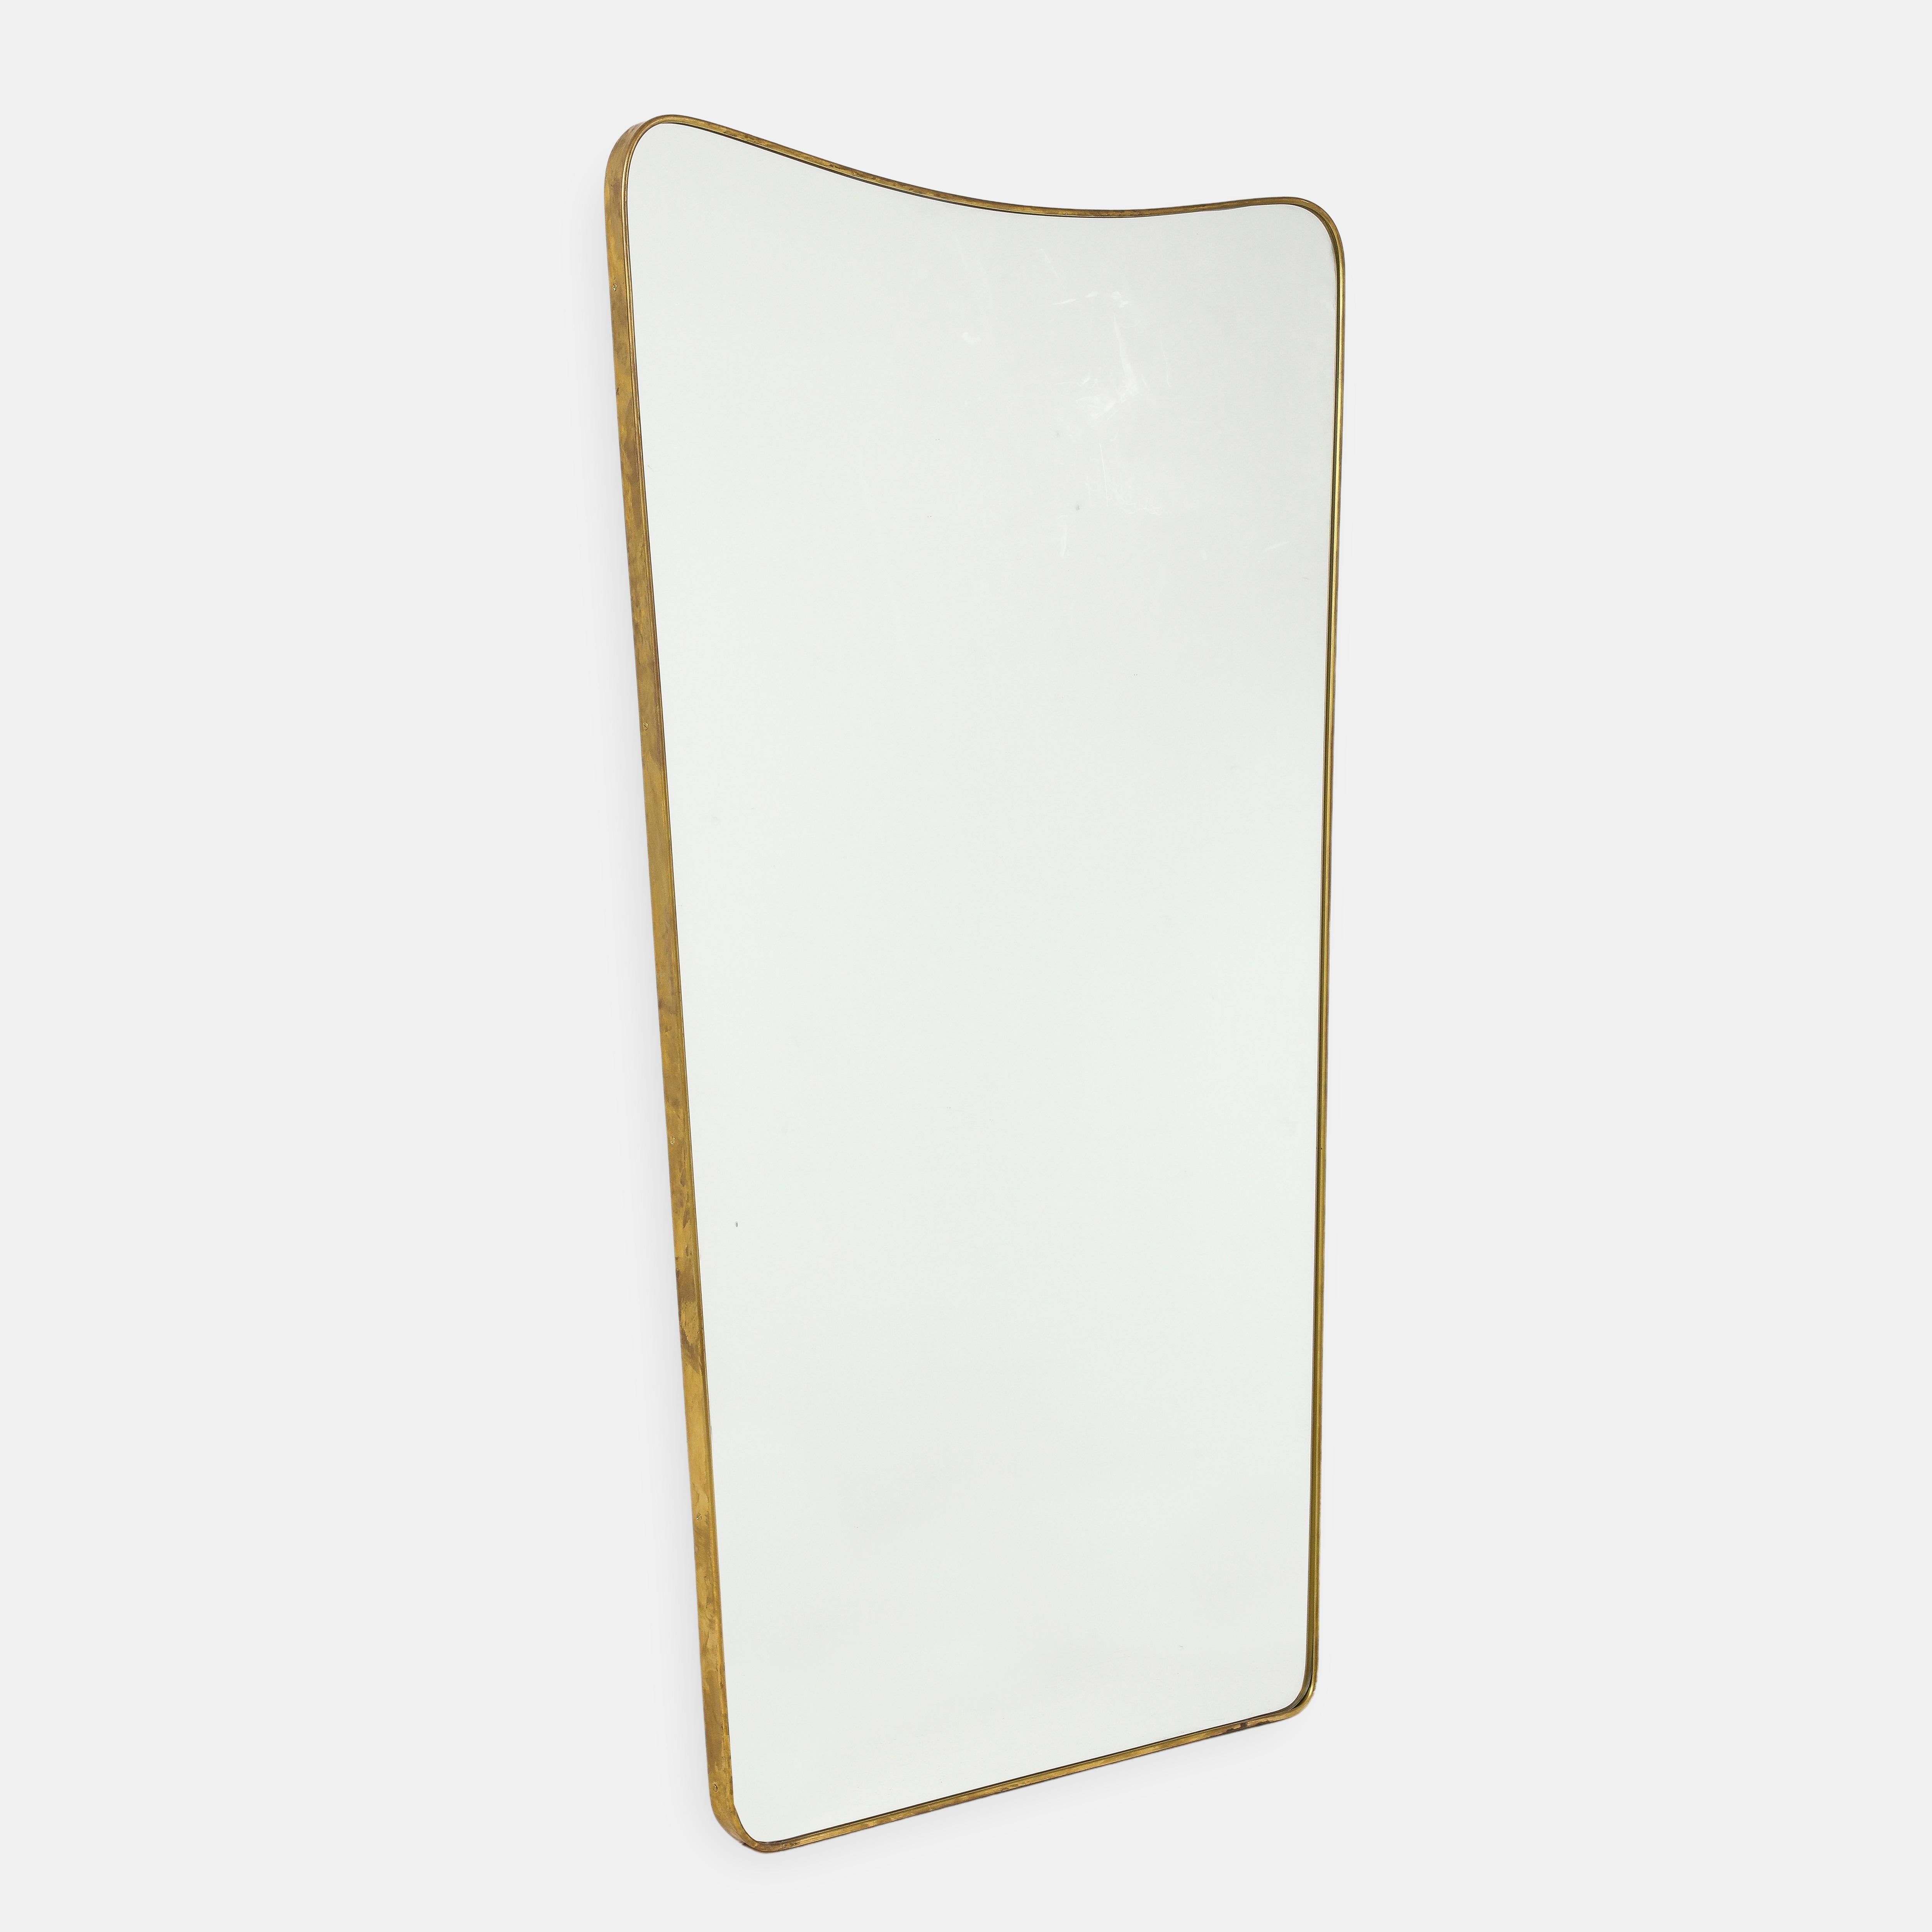 1950s Italian modernist grand scale wall mirror consisting of shaped brass frame with gently arched and rounded top which slightly tapers towards the bottom This chic and rare mirror is large and striking in size especially its width which is larger